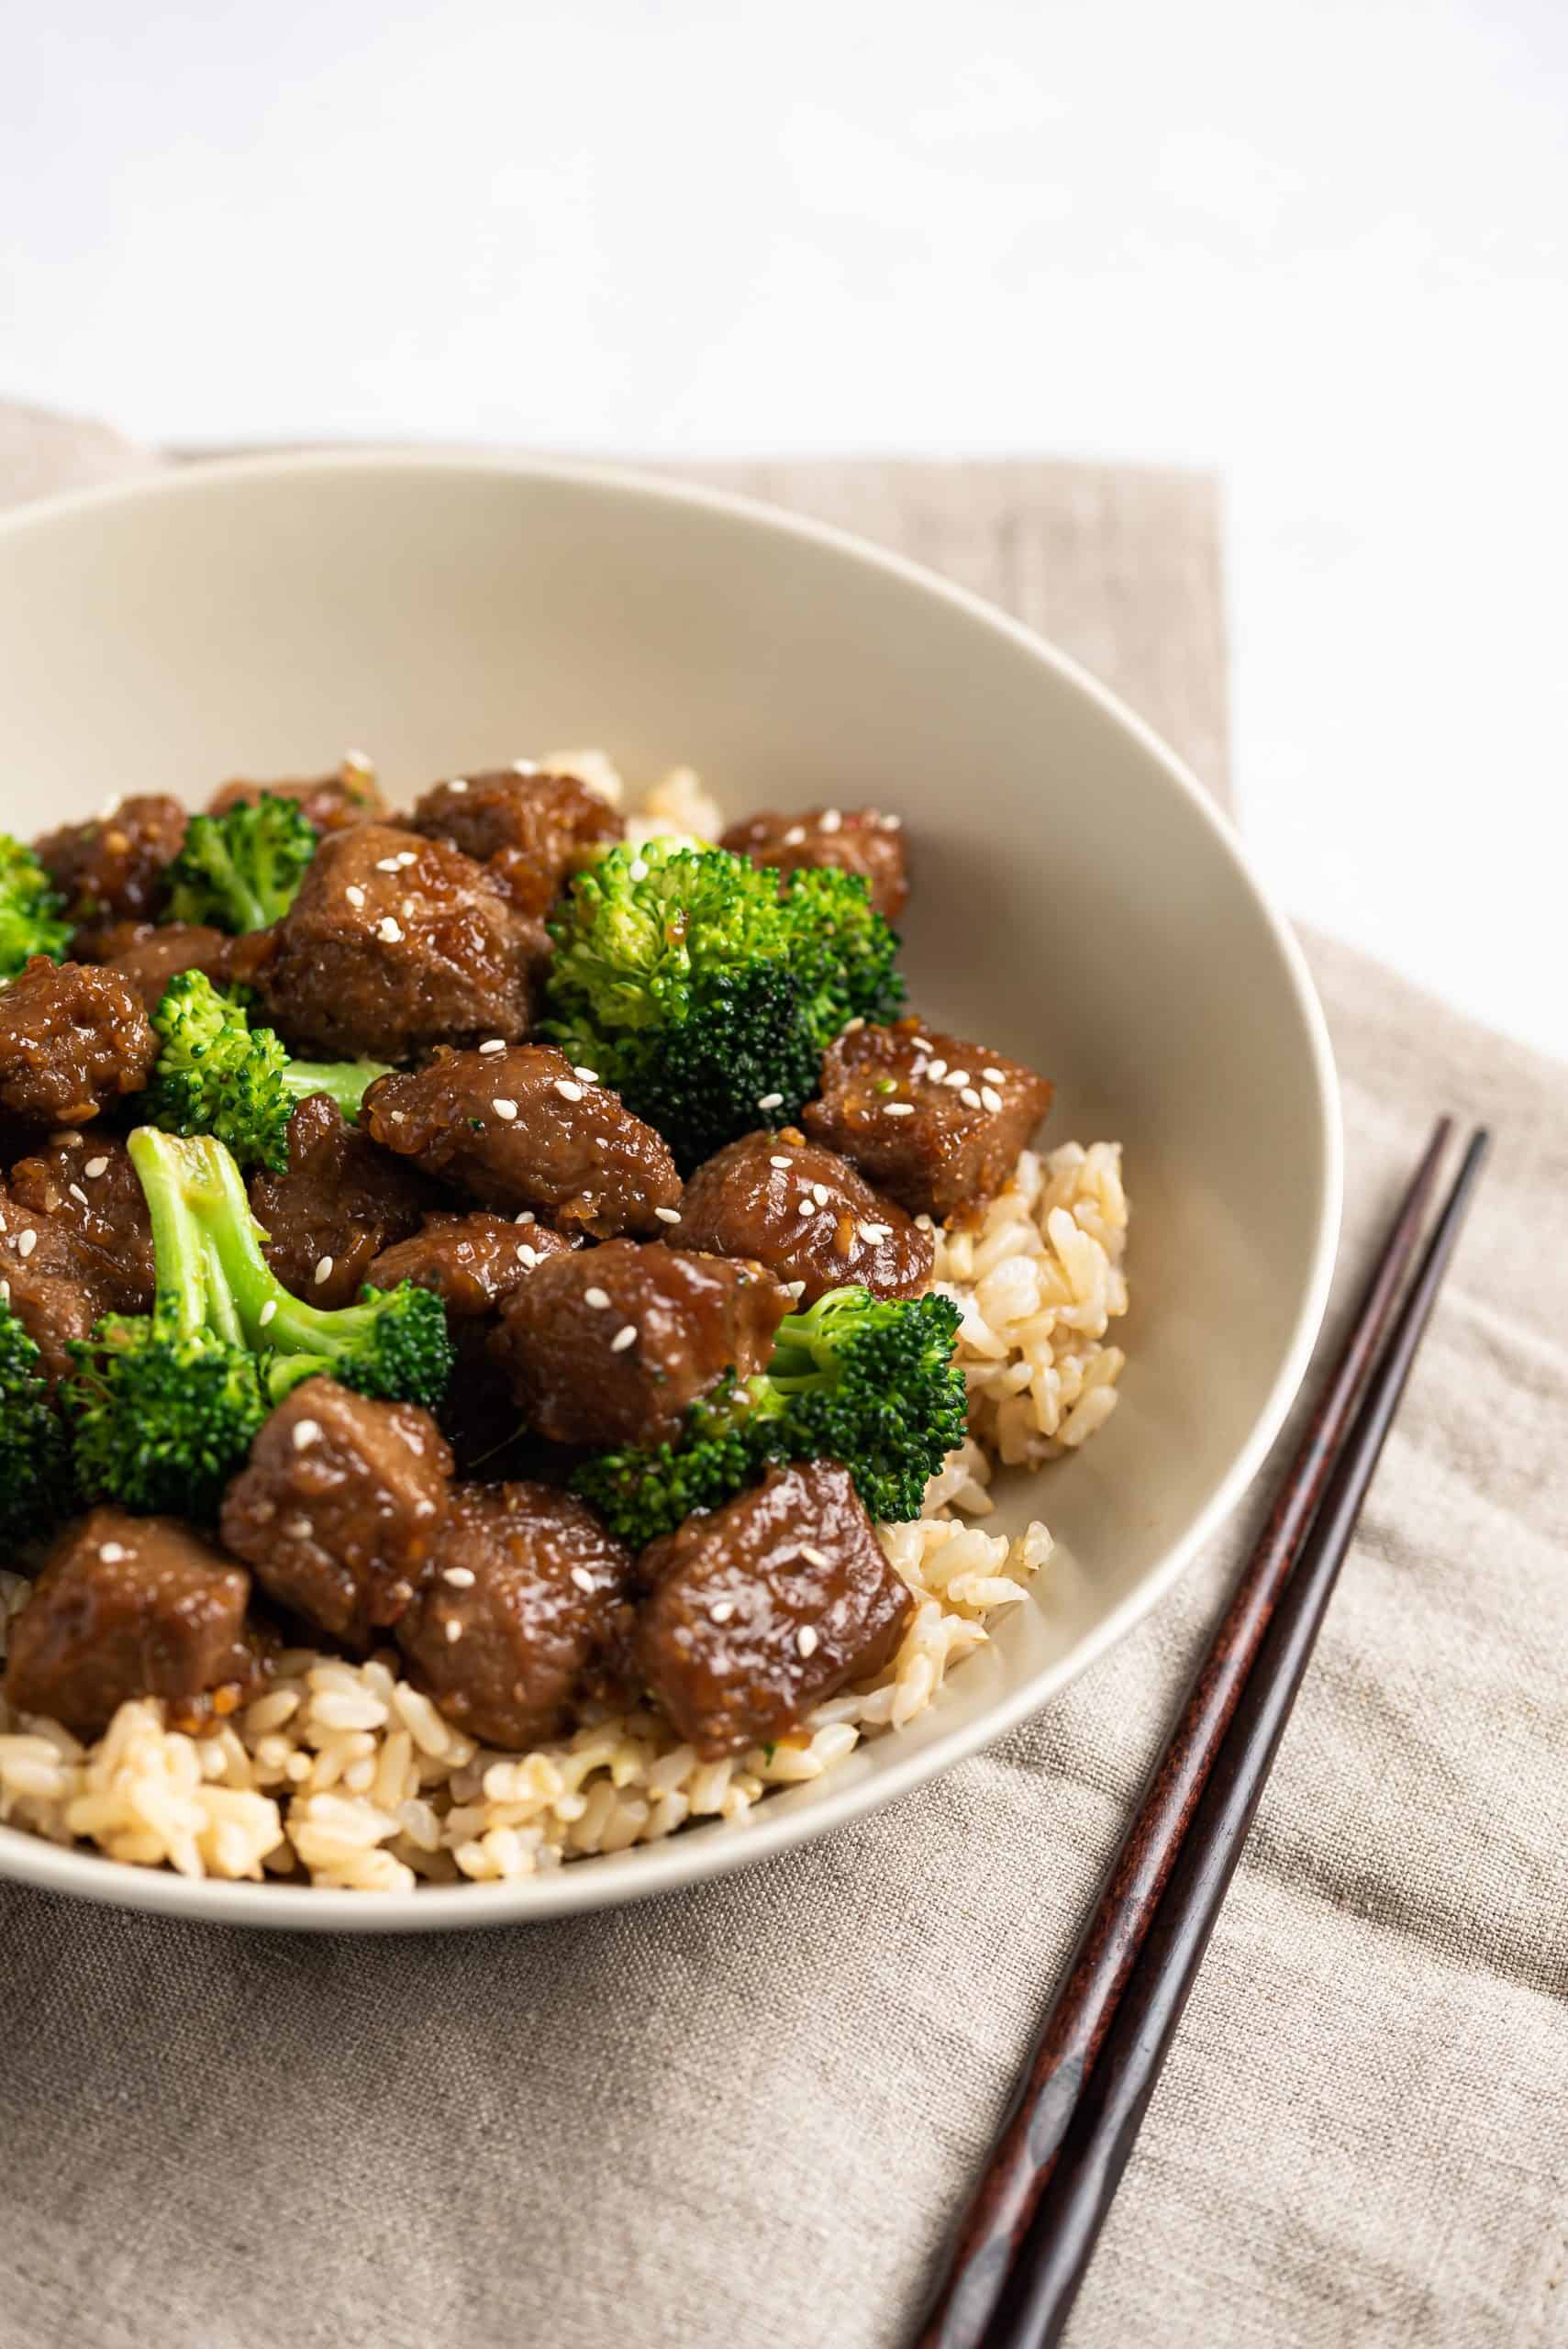 Beefless Beef and Broccoli - The Nut-Free Vegan